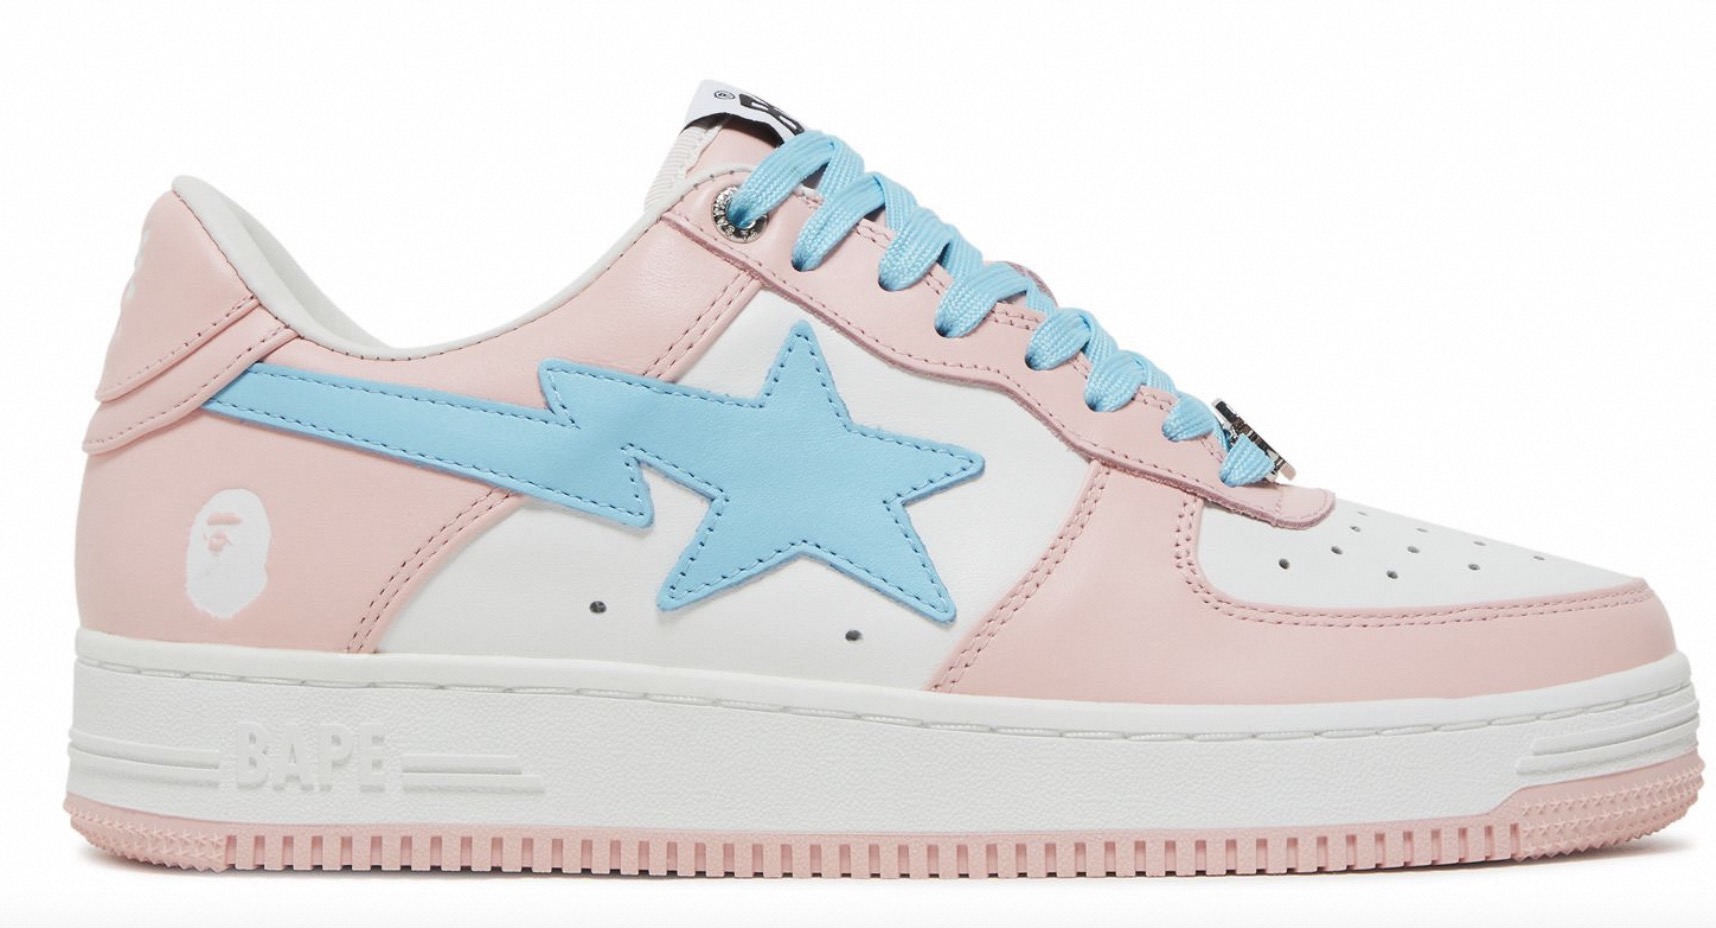 Pink Bapesta Shoes: Striding in Colorful Streetwear Style插图3